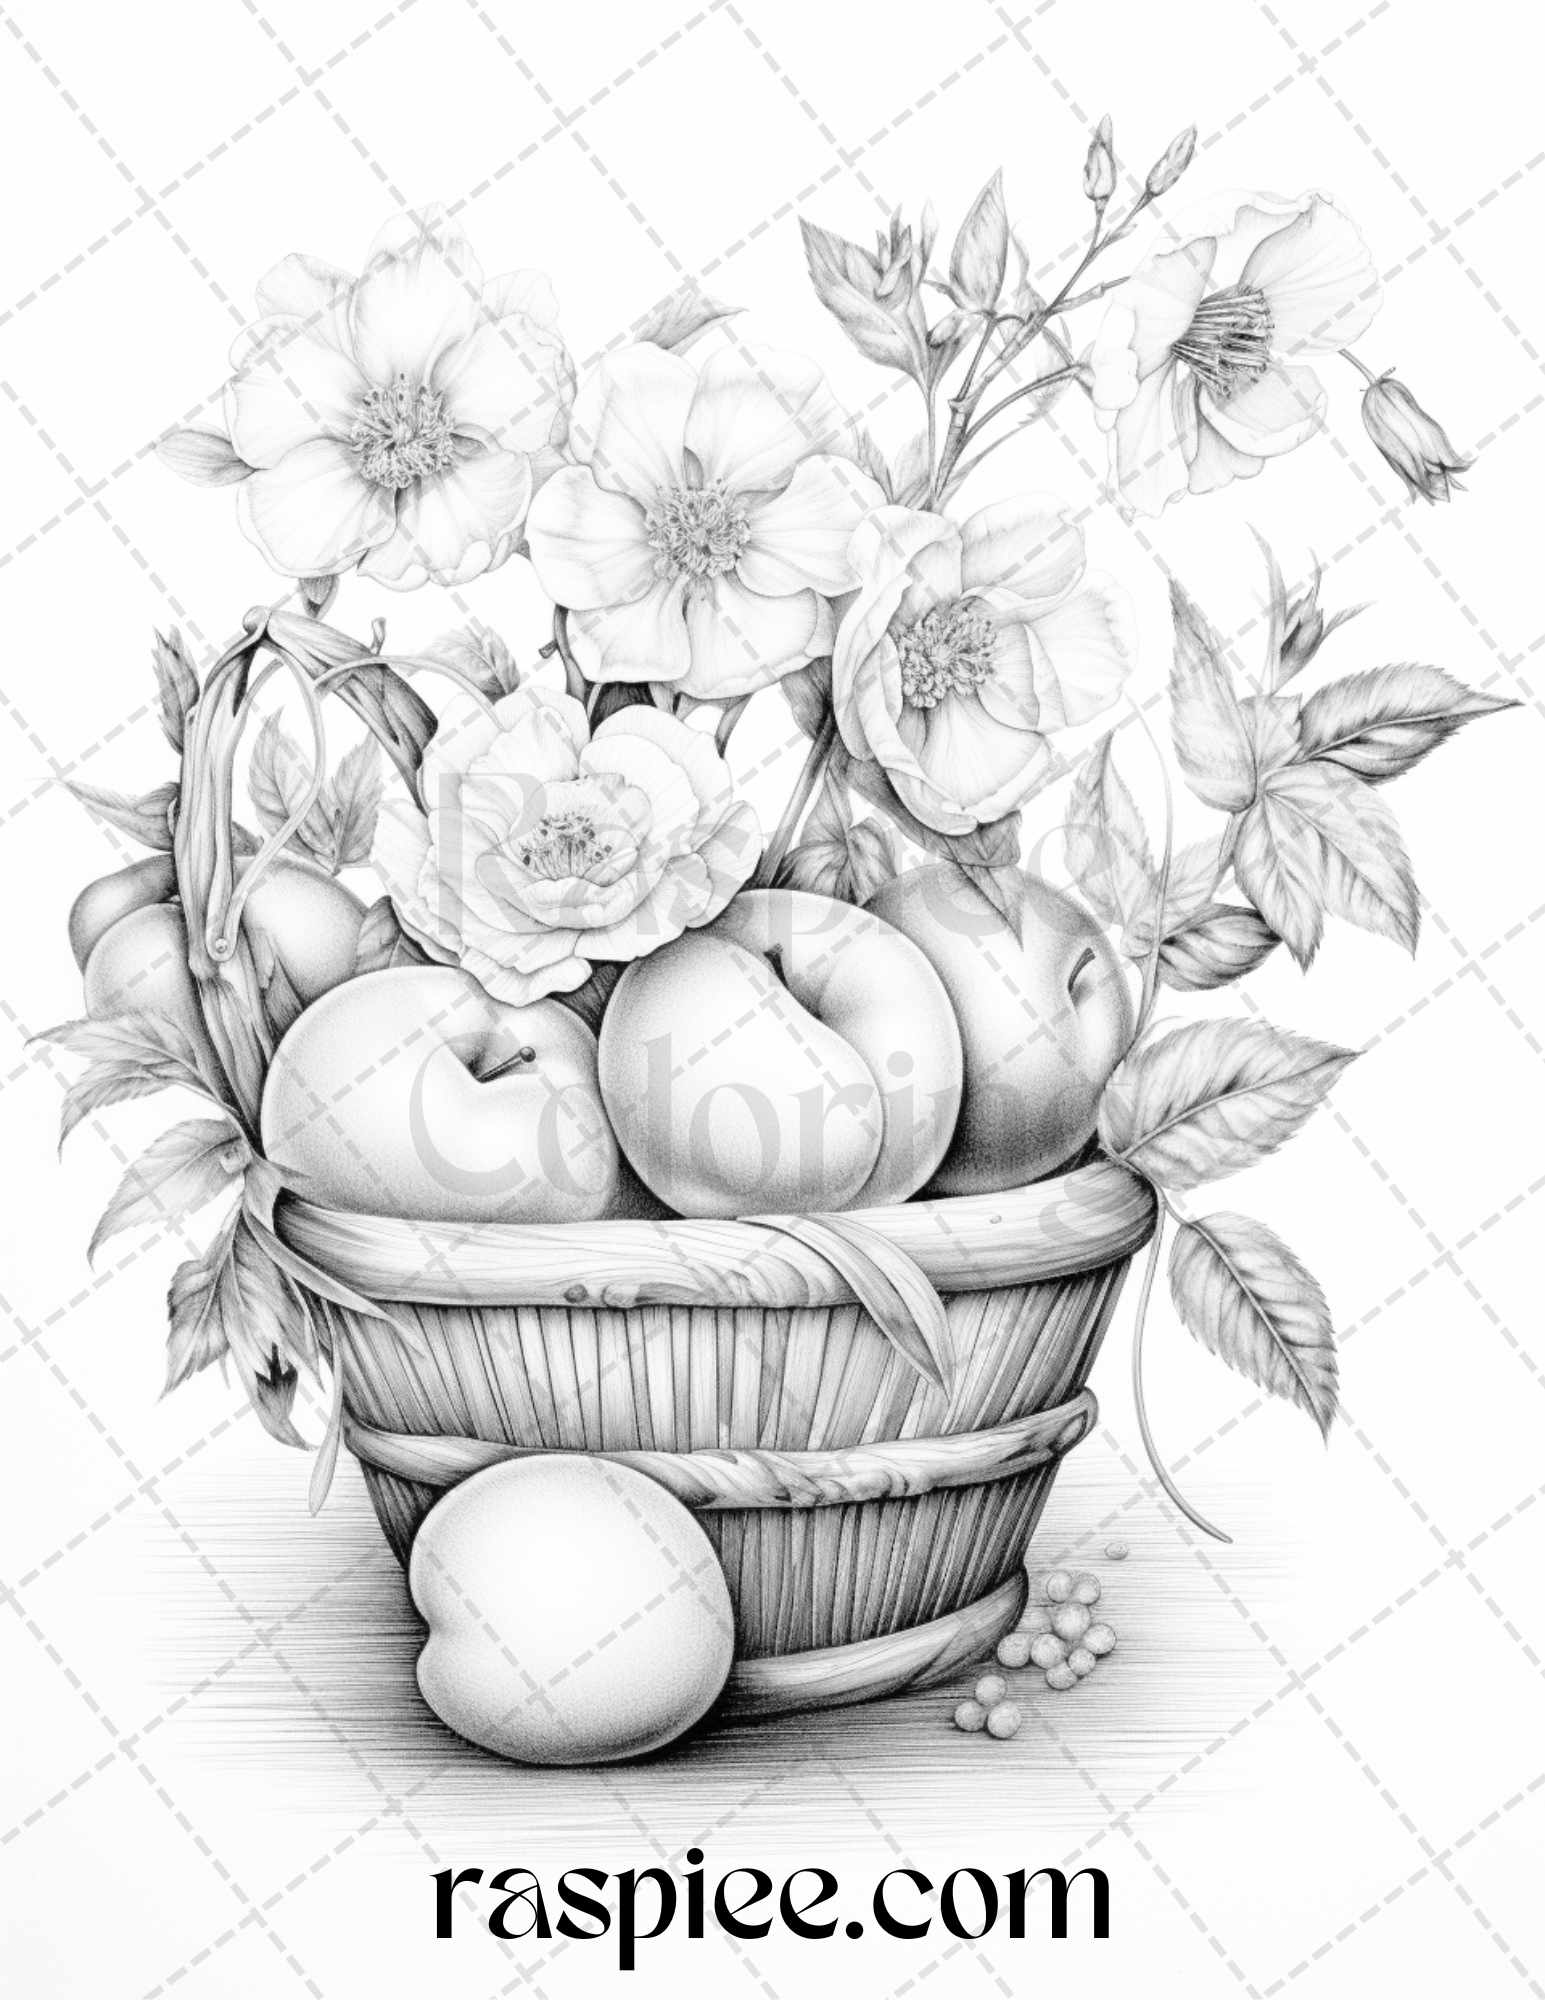 Grayscale Fruit Basket Coloring Pages, Printable Adult Coloring Sheets, Detailed Fruit Illustrations, Stress Relief Coloring Book, Instant Download Coloring Pages, Mindful Coloring Activities, DIY Coloring Fun